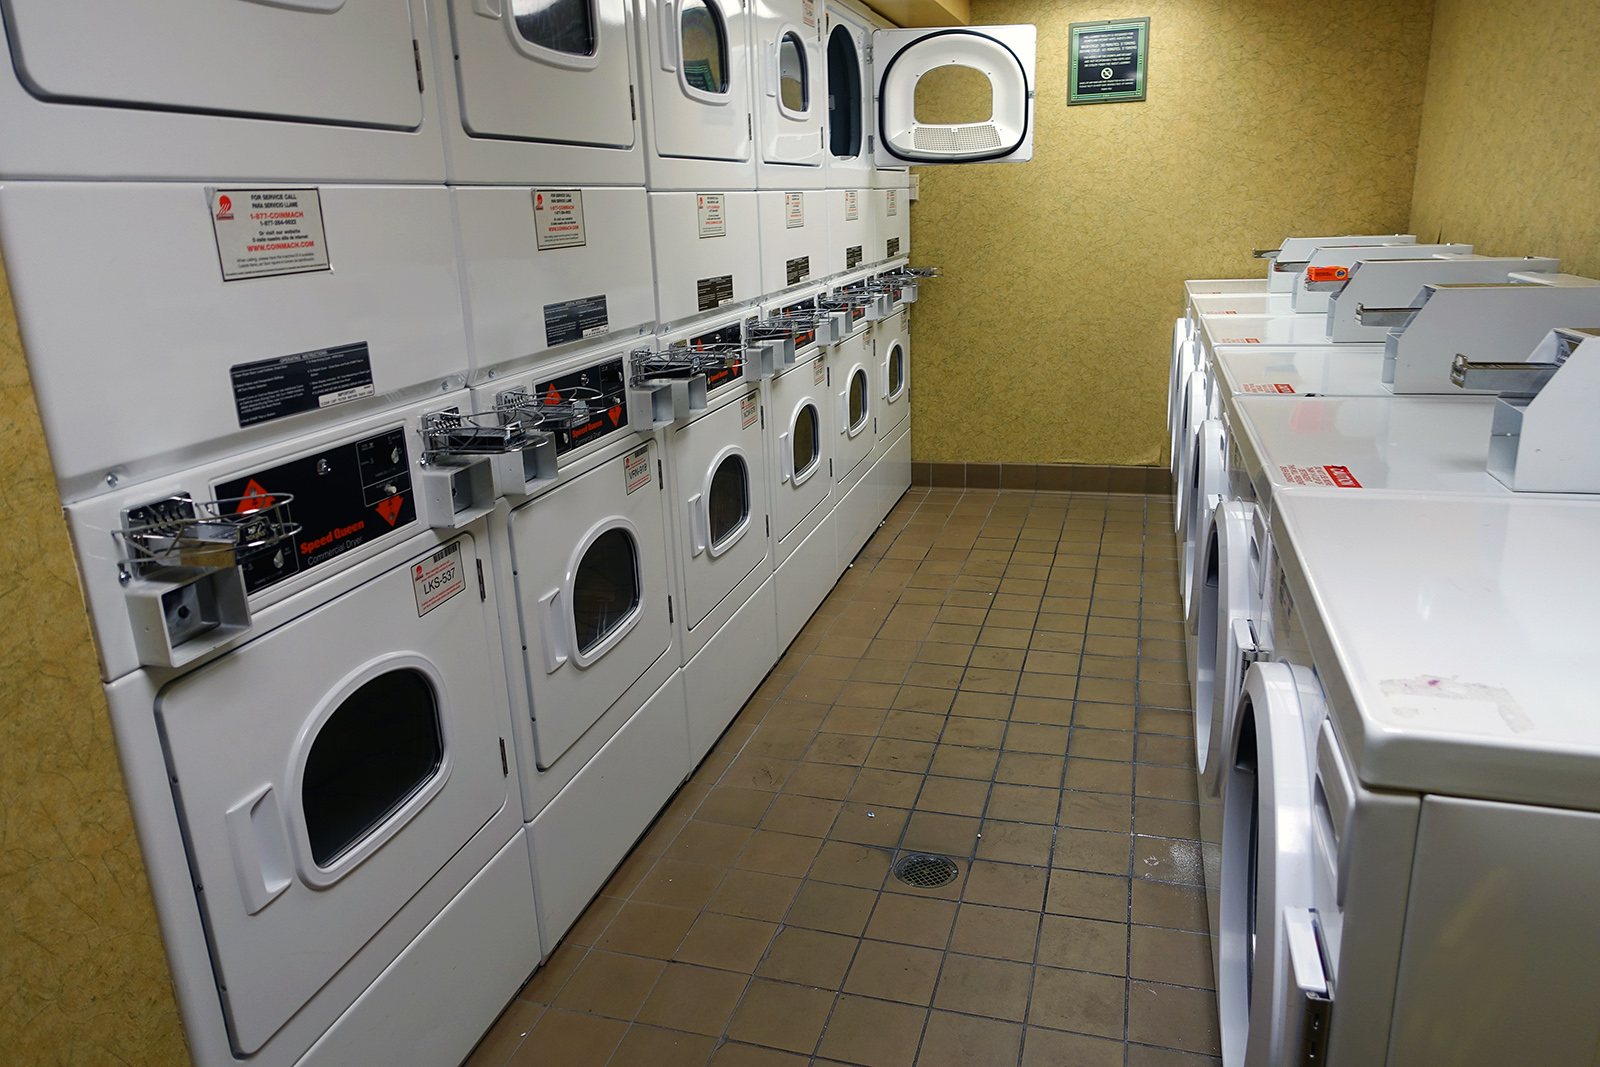 a row of washers and dryers in a public laussony